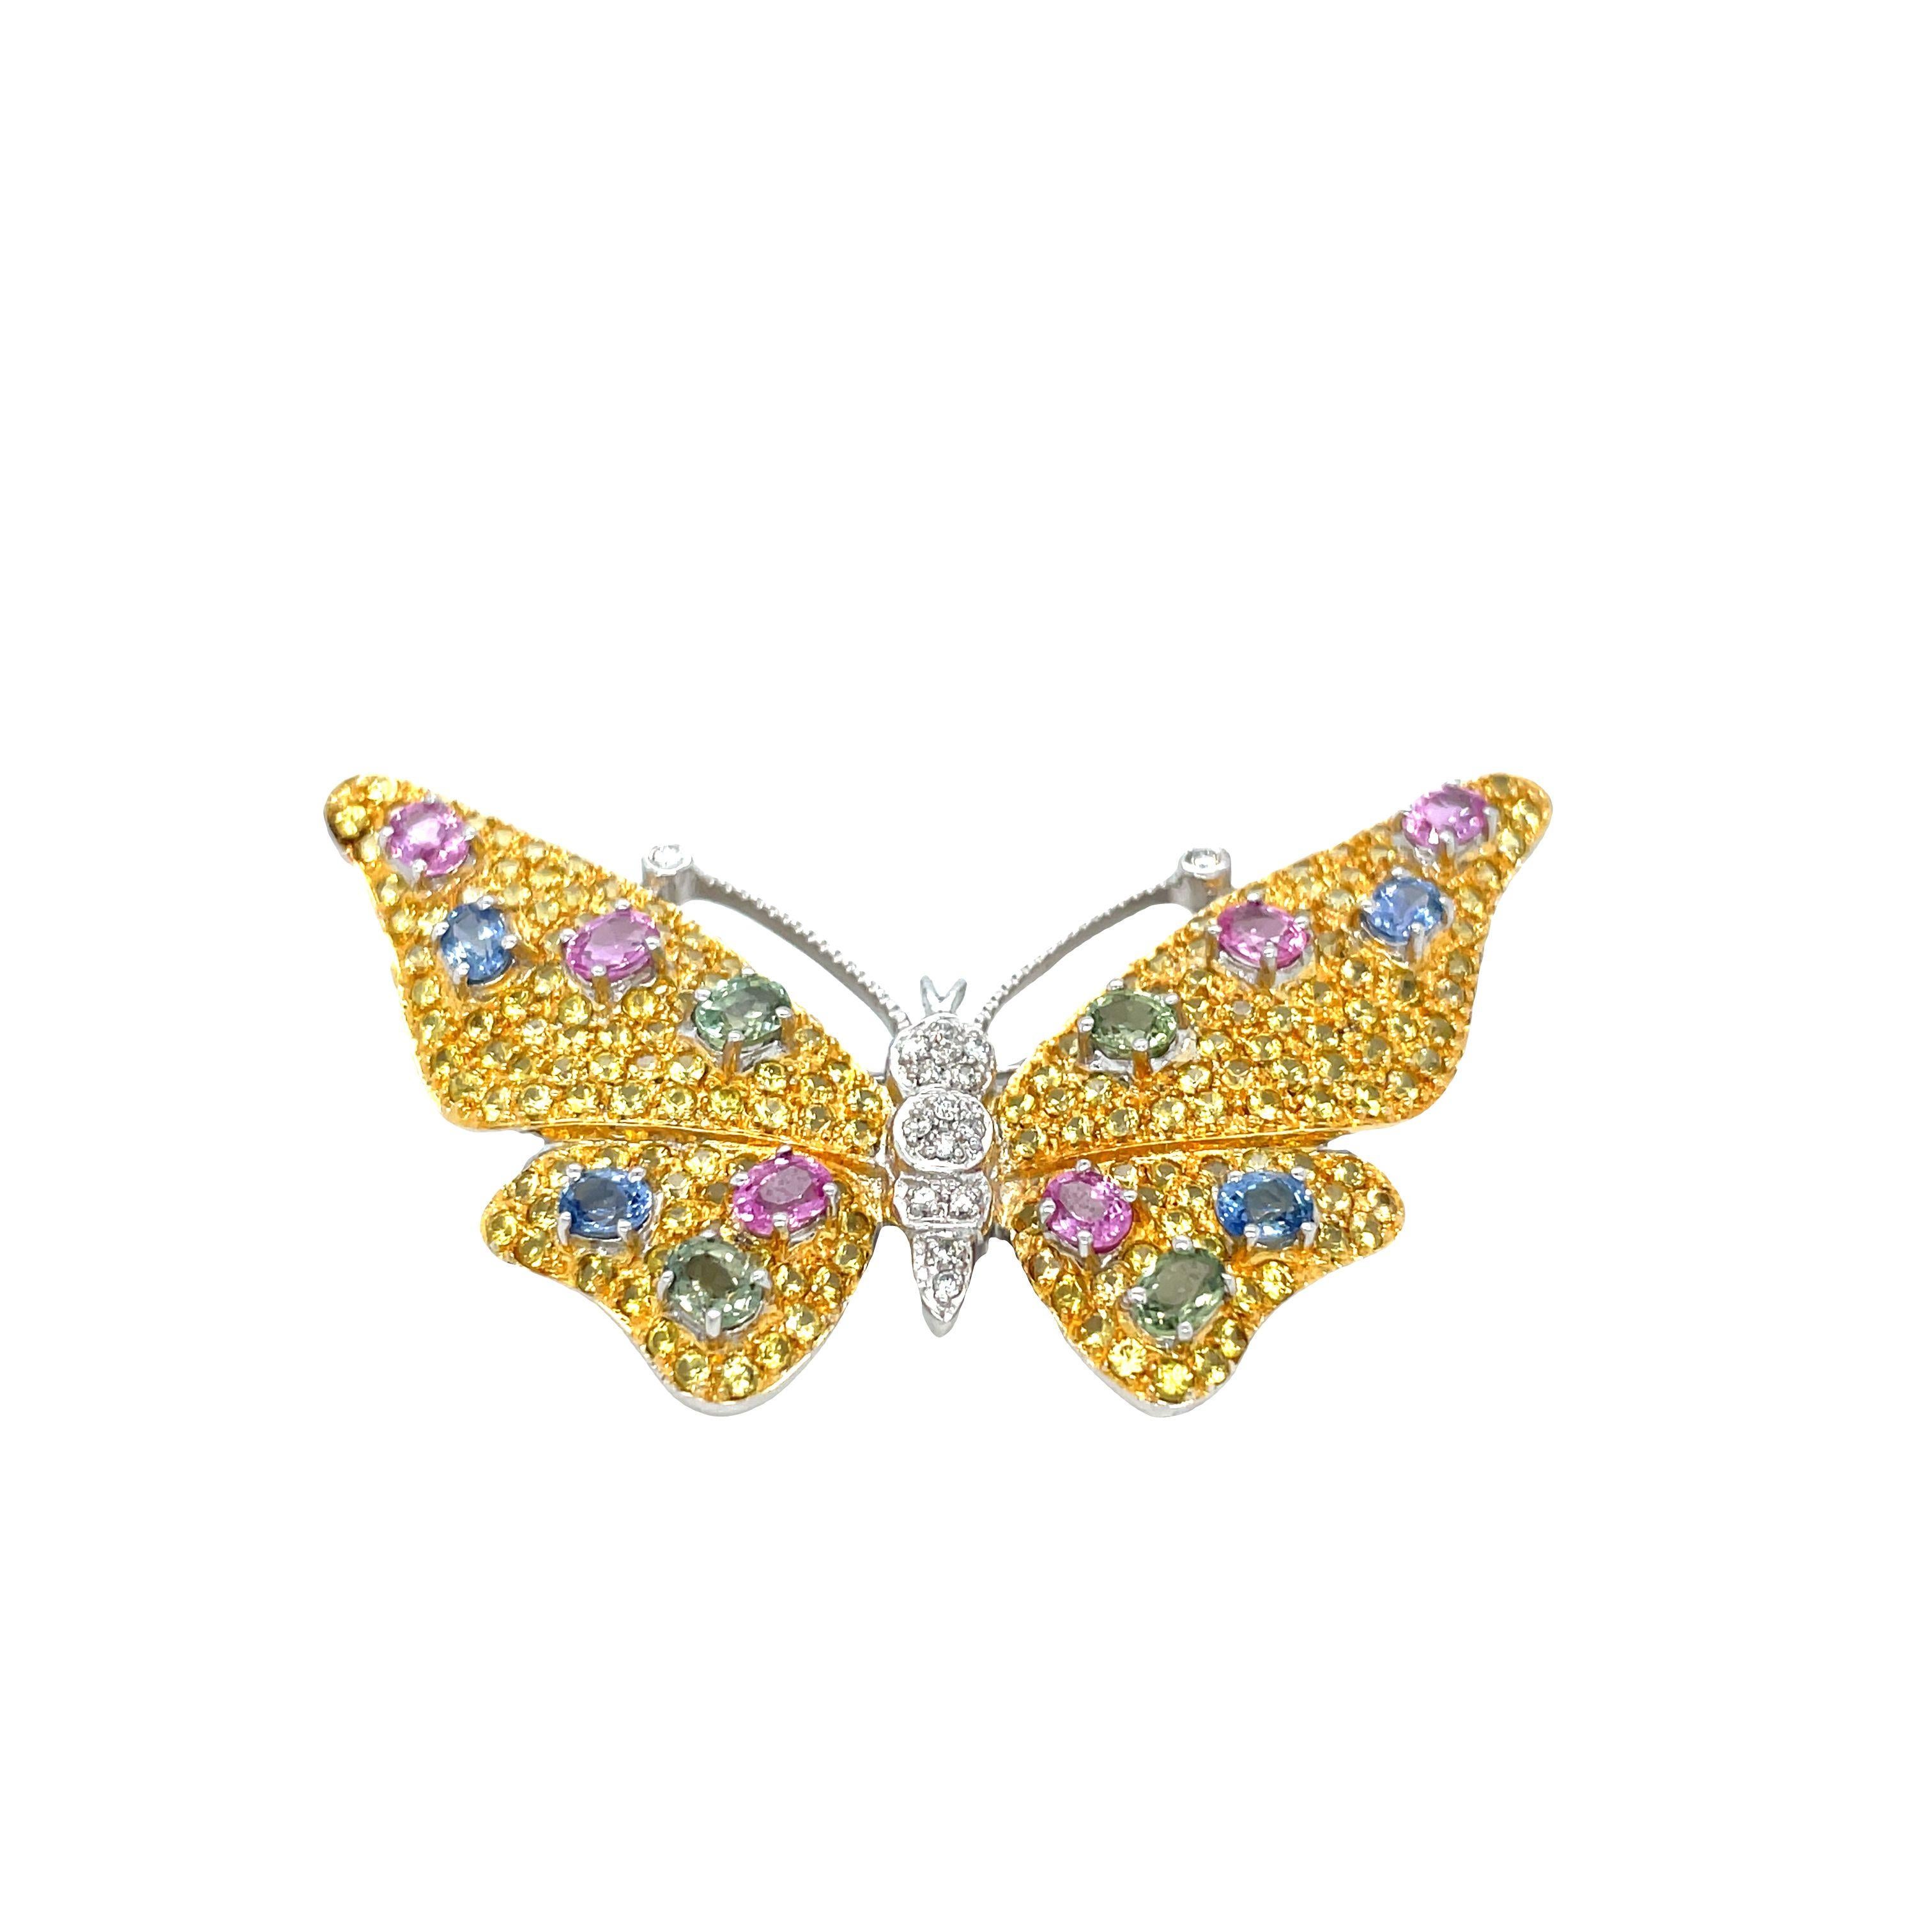 This exquisite piece features colorful sapphires and diamonds, adding elegance and sparkle to your look. A true work of art, this brooch features superb gems totaling 5.5 carats, carefully set in polished 14K white and yellow gold.

The wings of